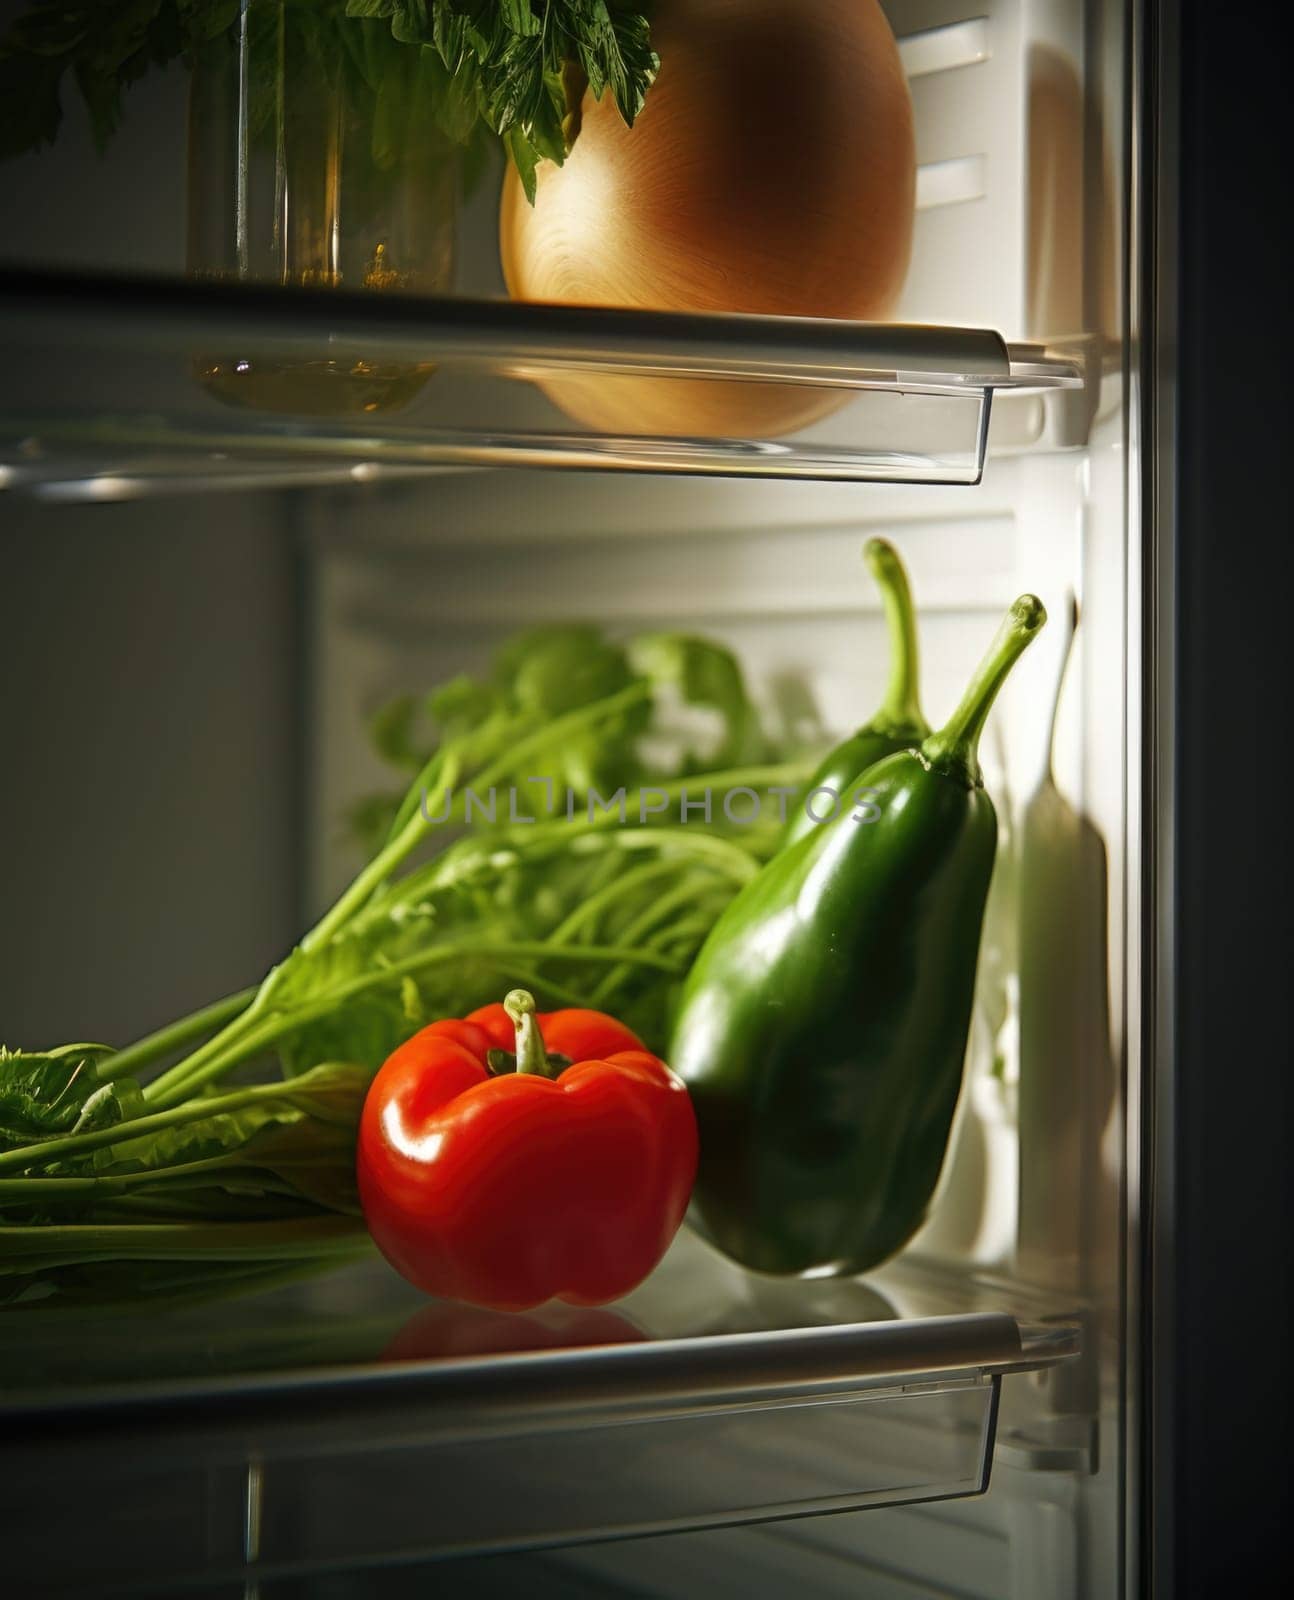 A refrigerator with vegetables and other food, AI by starush